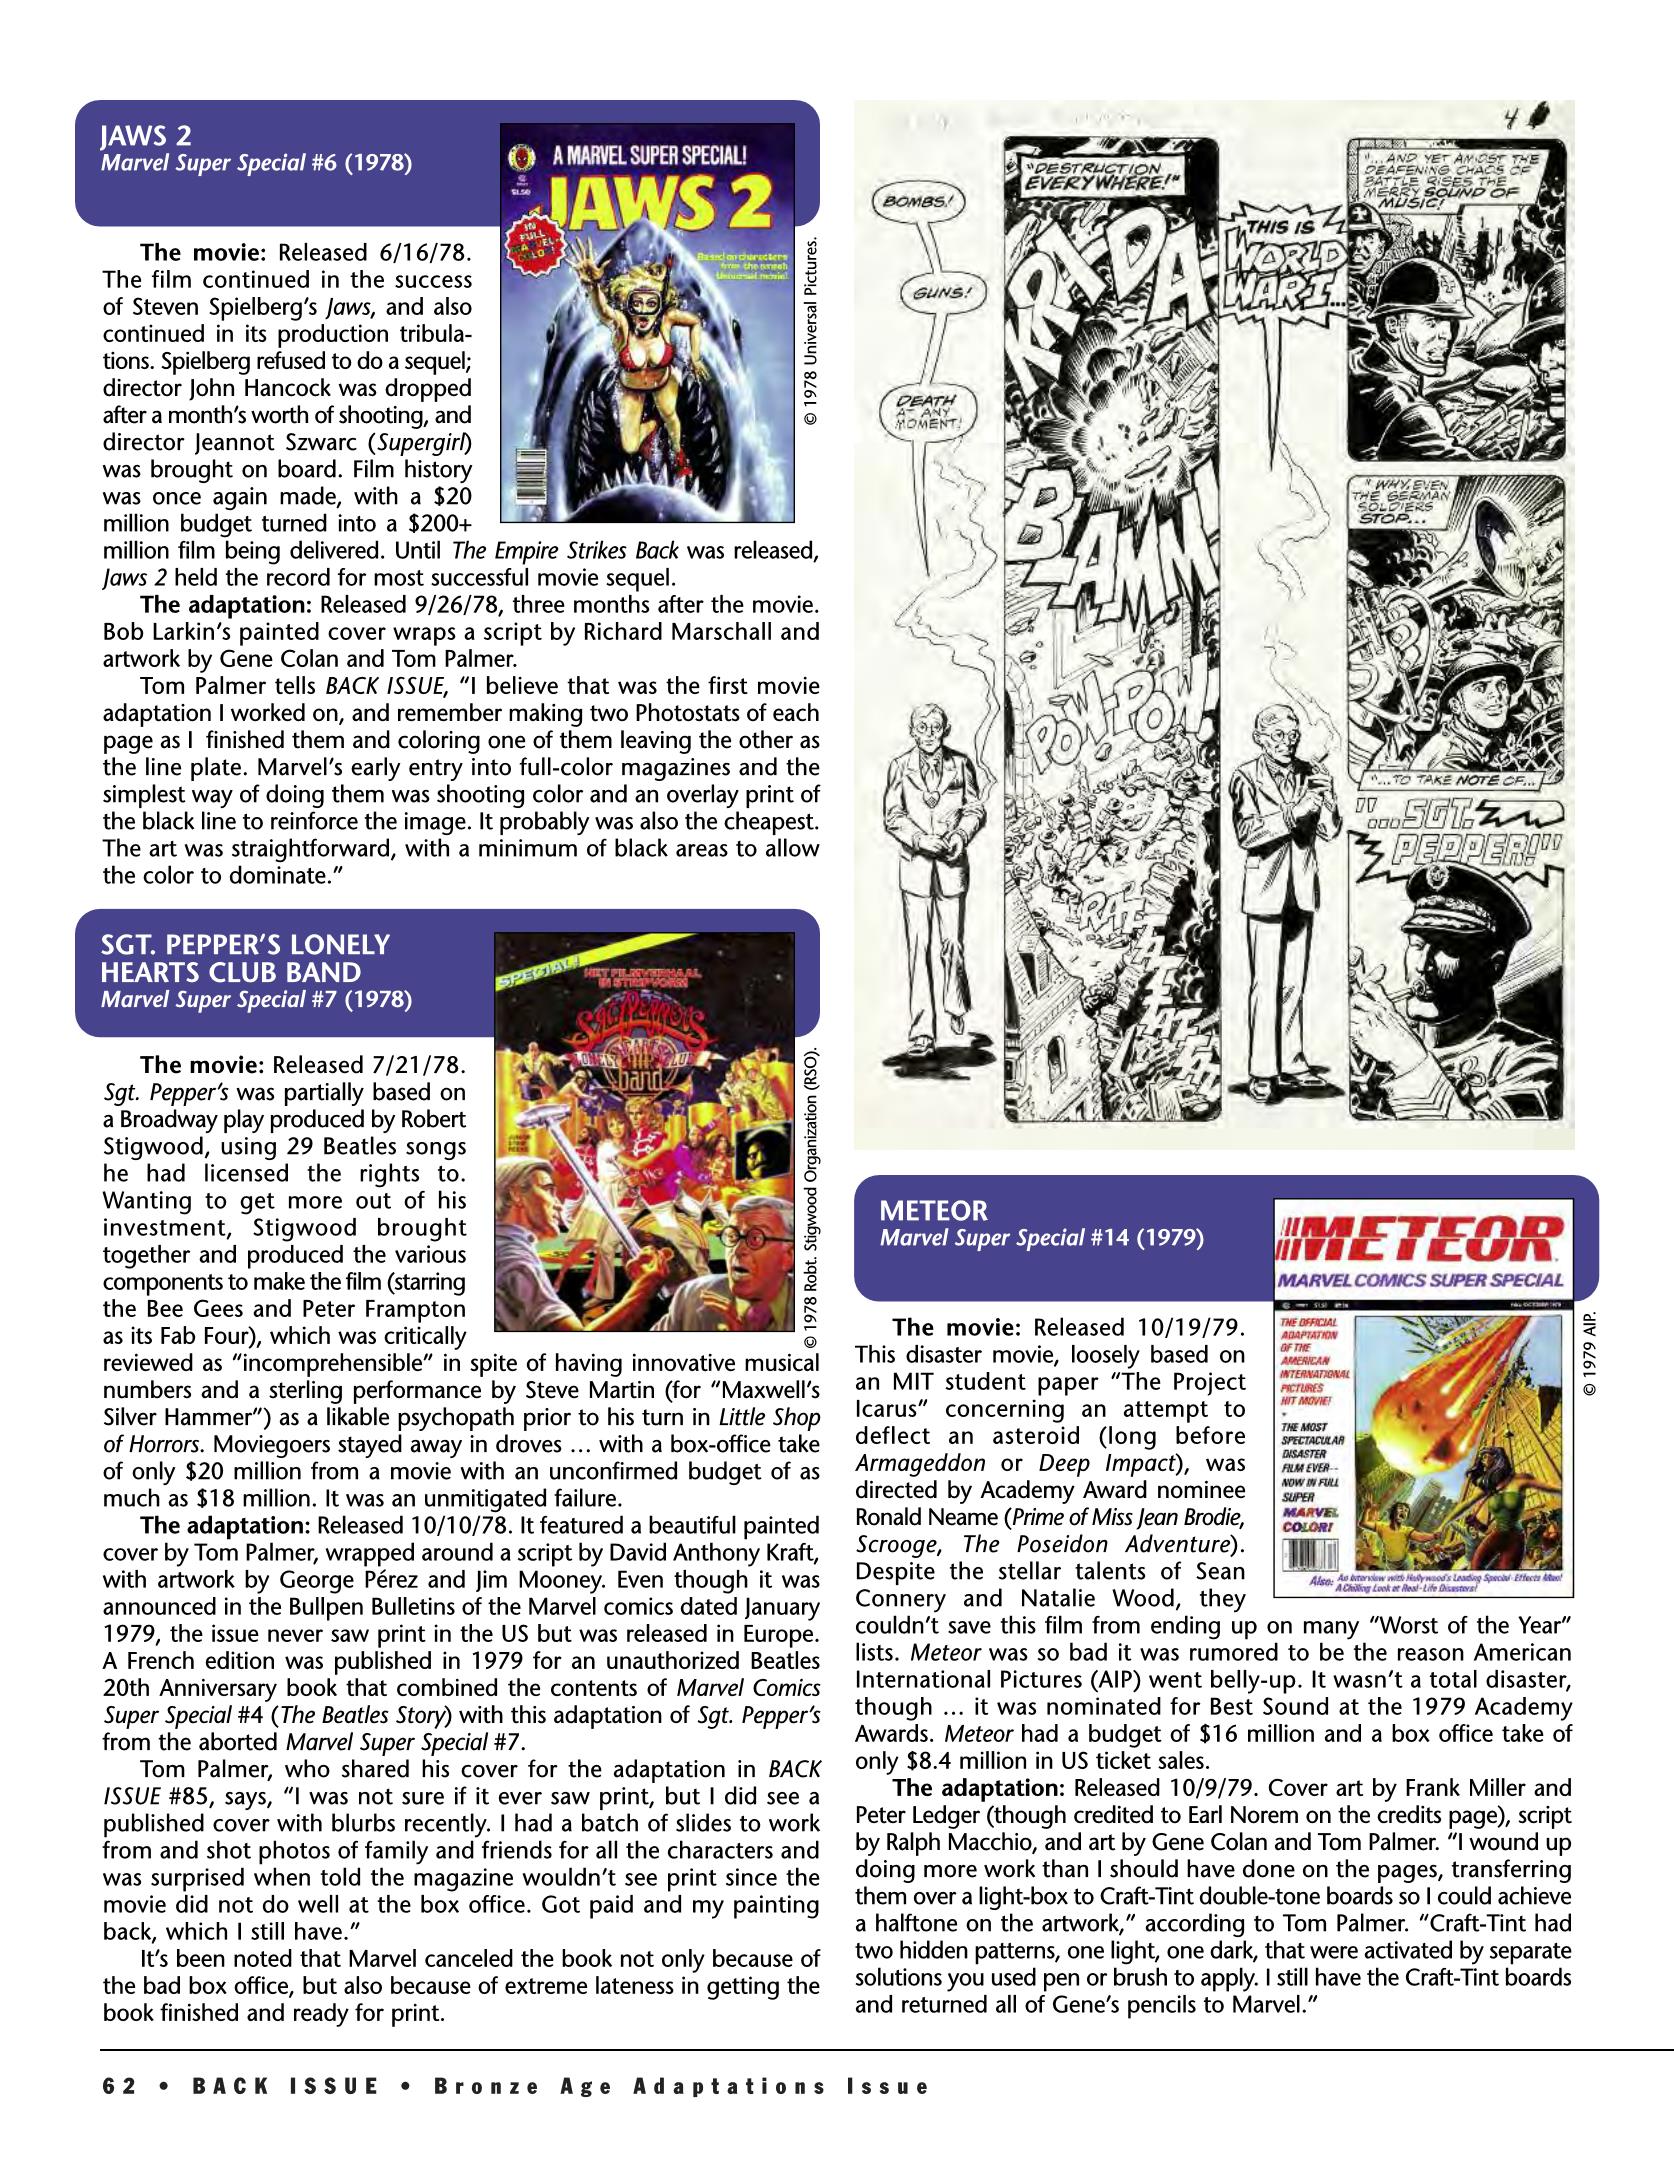 Read online Back Issue comic -  Issue #89 - 61